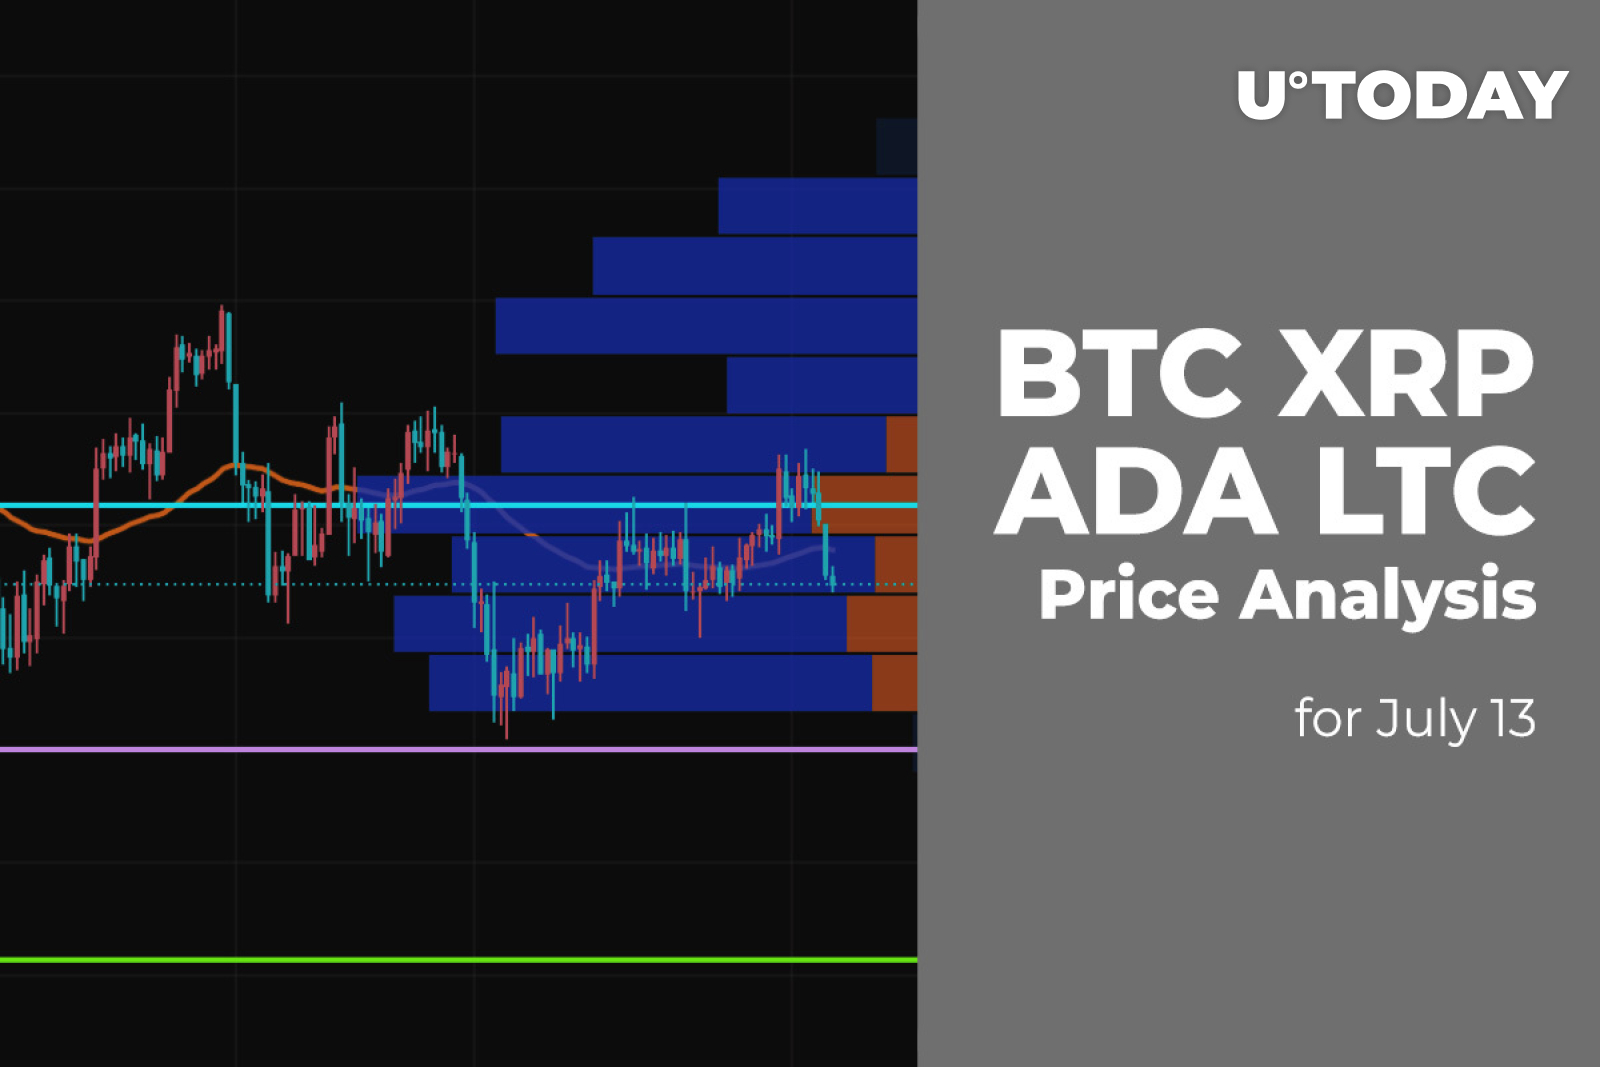 BTC, XRP, ADA and LTC Price Analysis for July 13